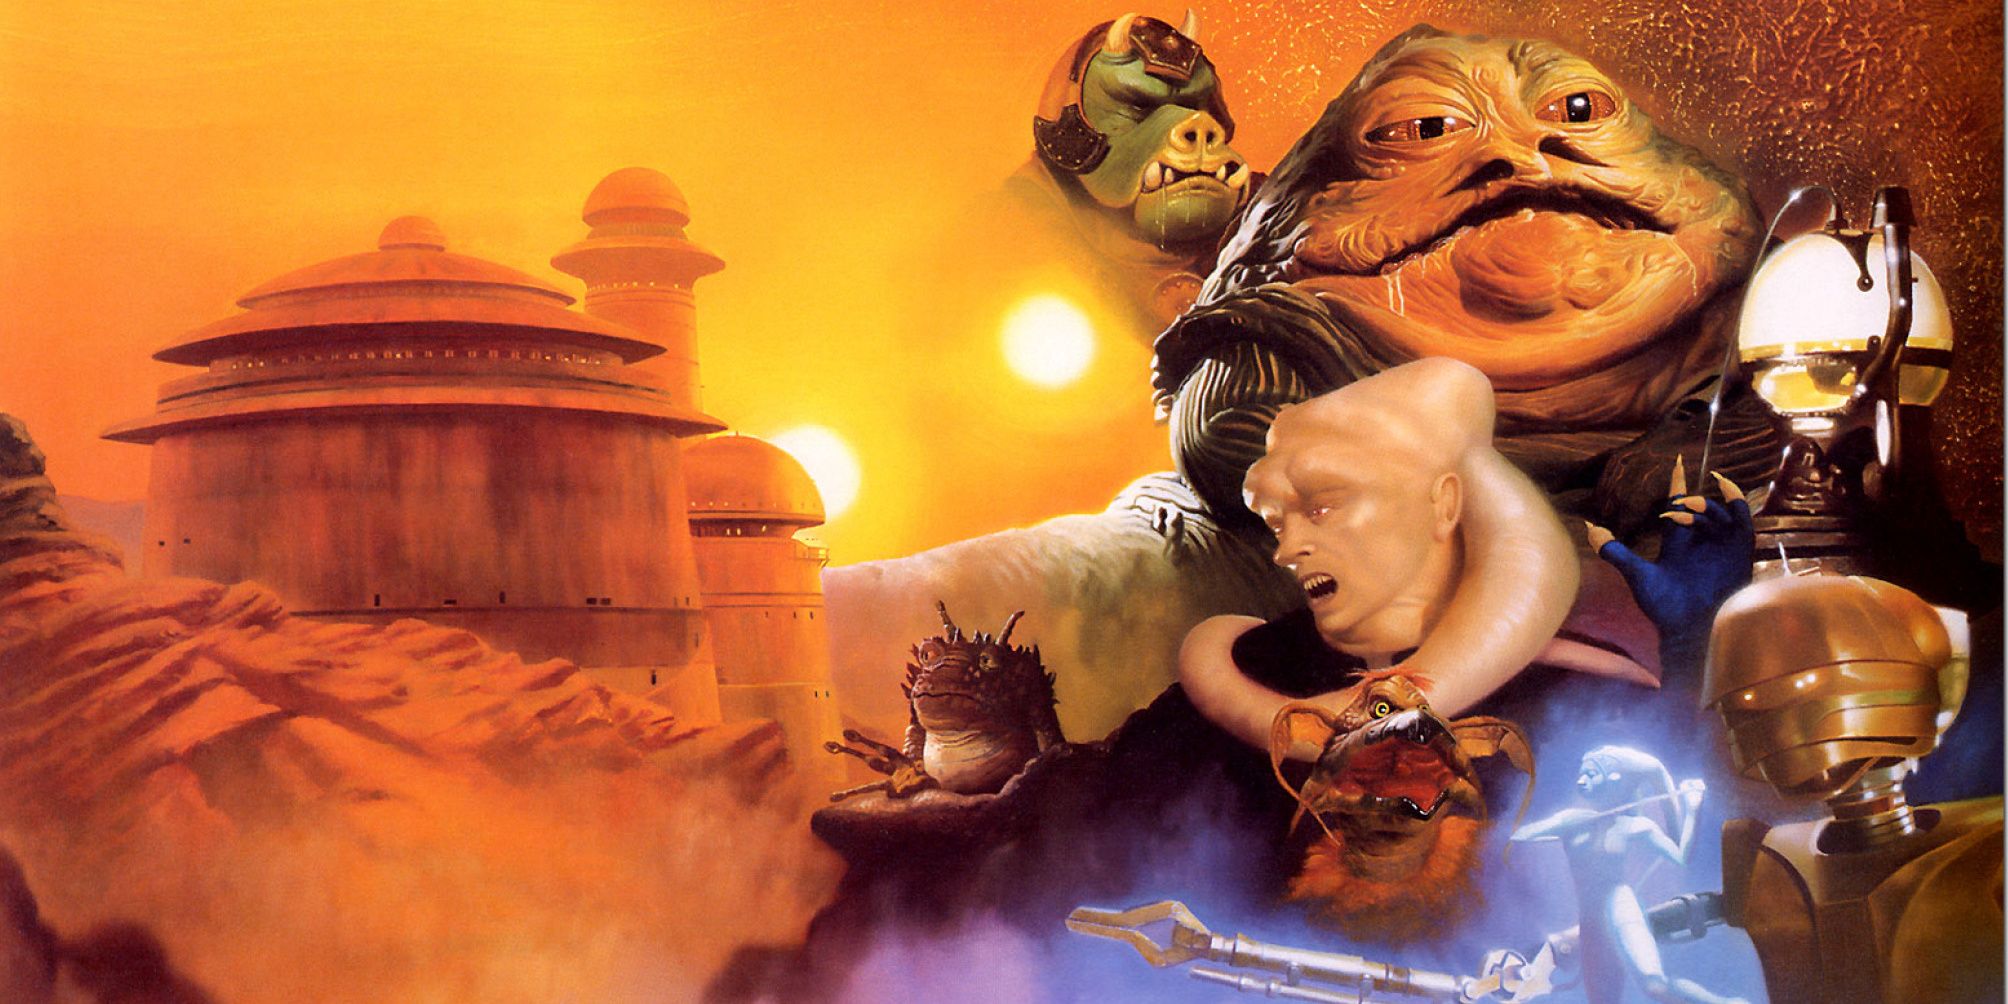 The painting that serves as the cover of the book &quot;Tales from Jabba's Palace&quot;